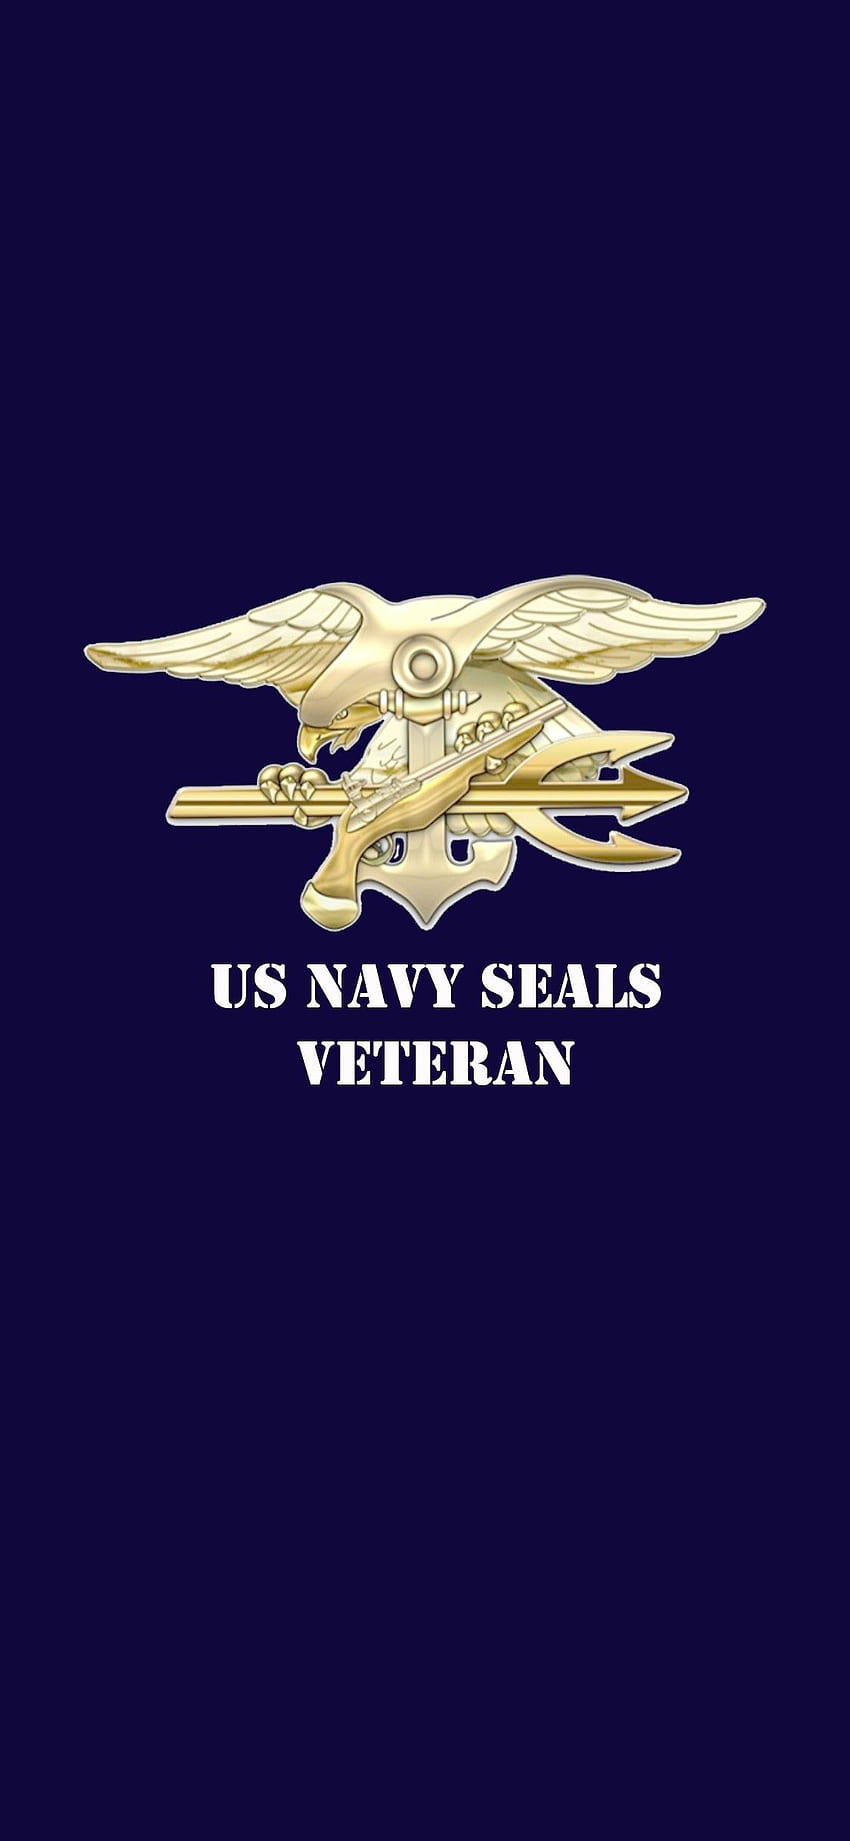 Wallpaper Iphone Army military navy seals all wallpapers wallpaper 